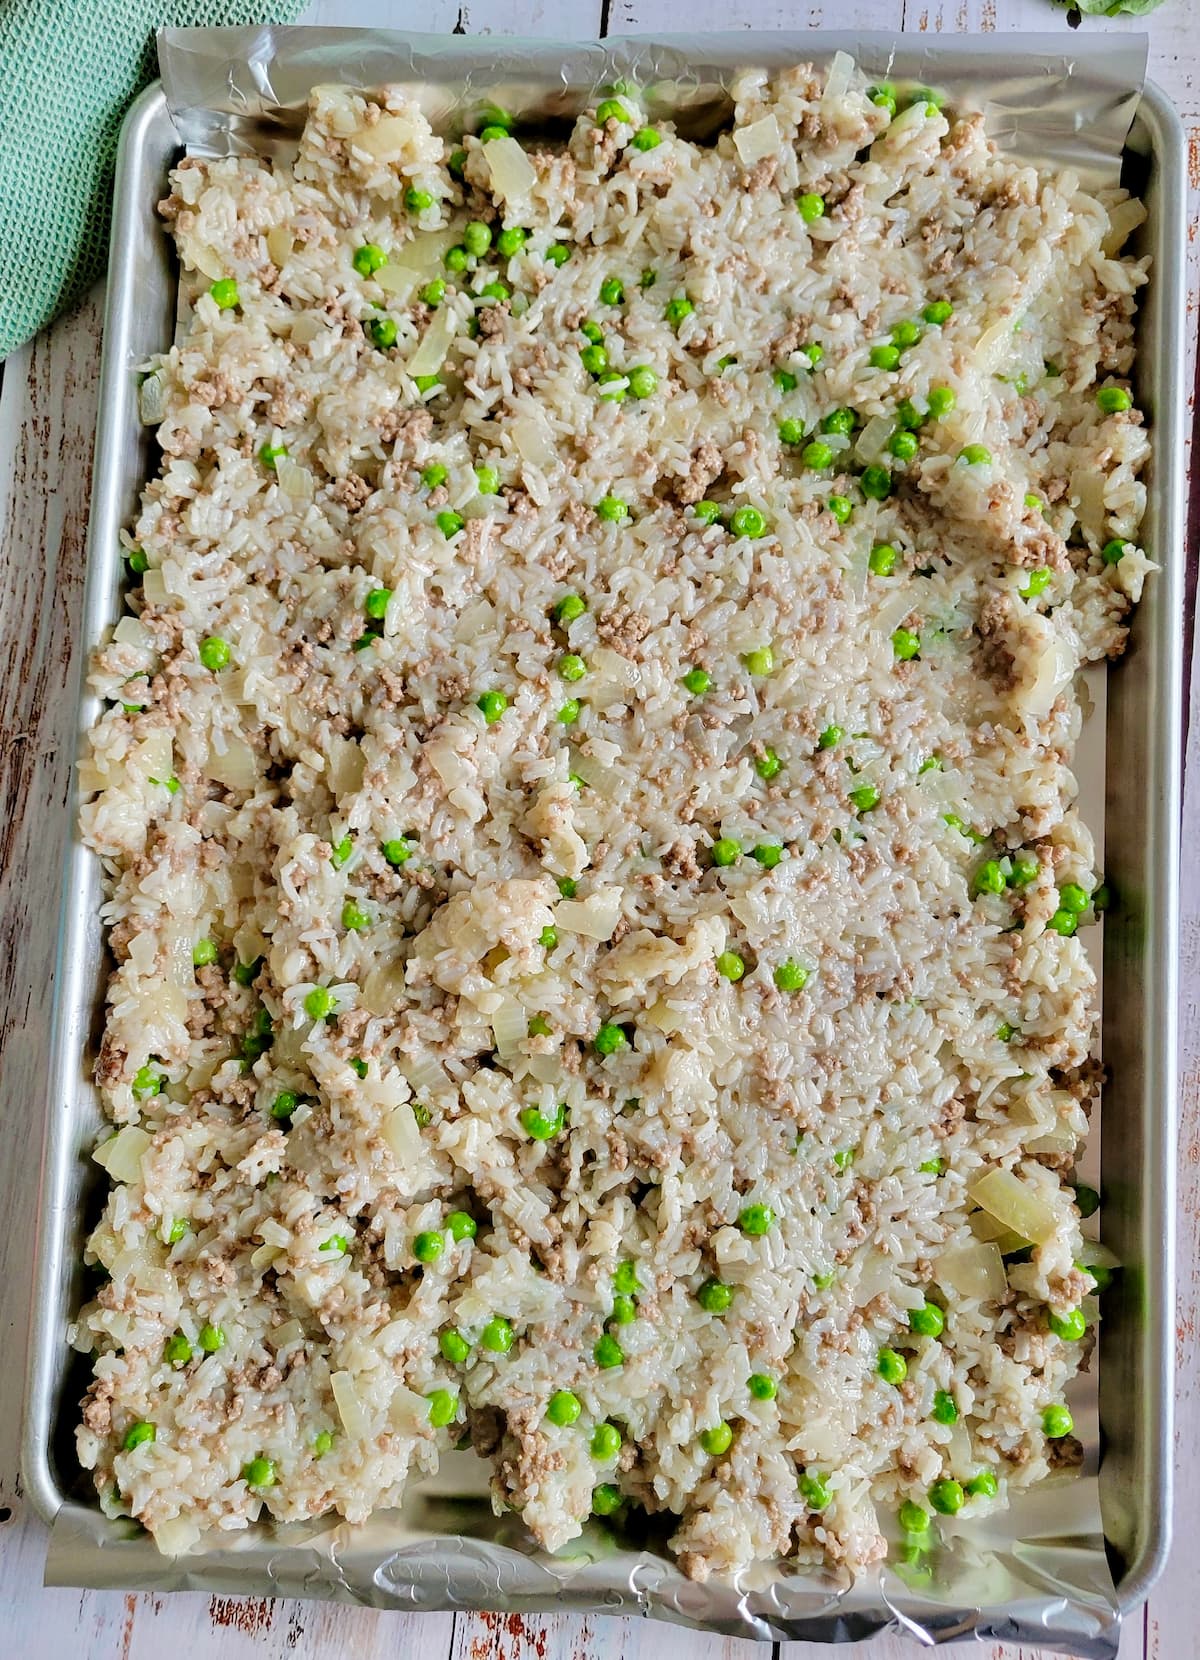 sheet pan of cooked rice, peas and ground beef